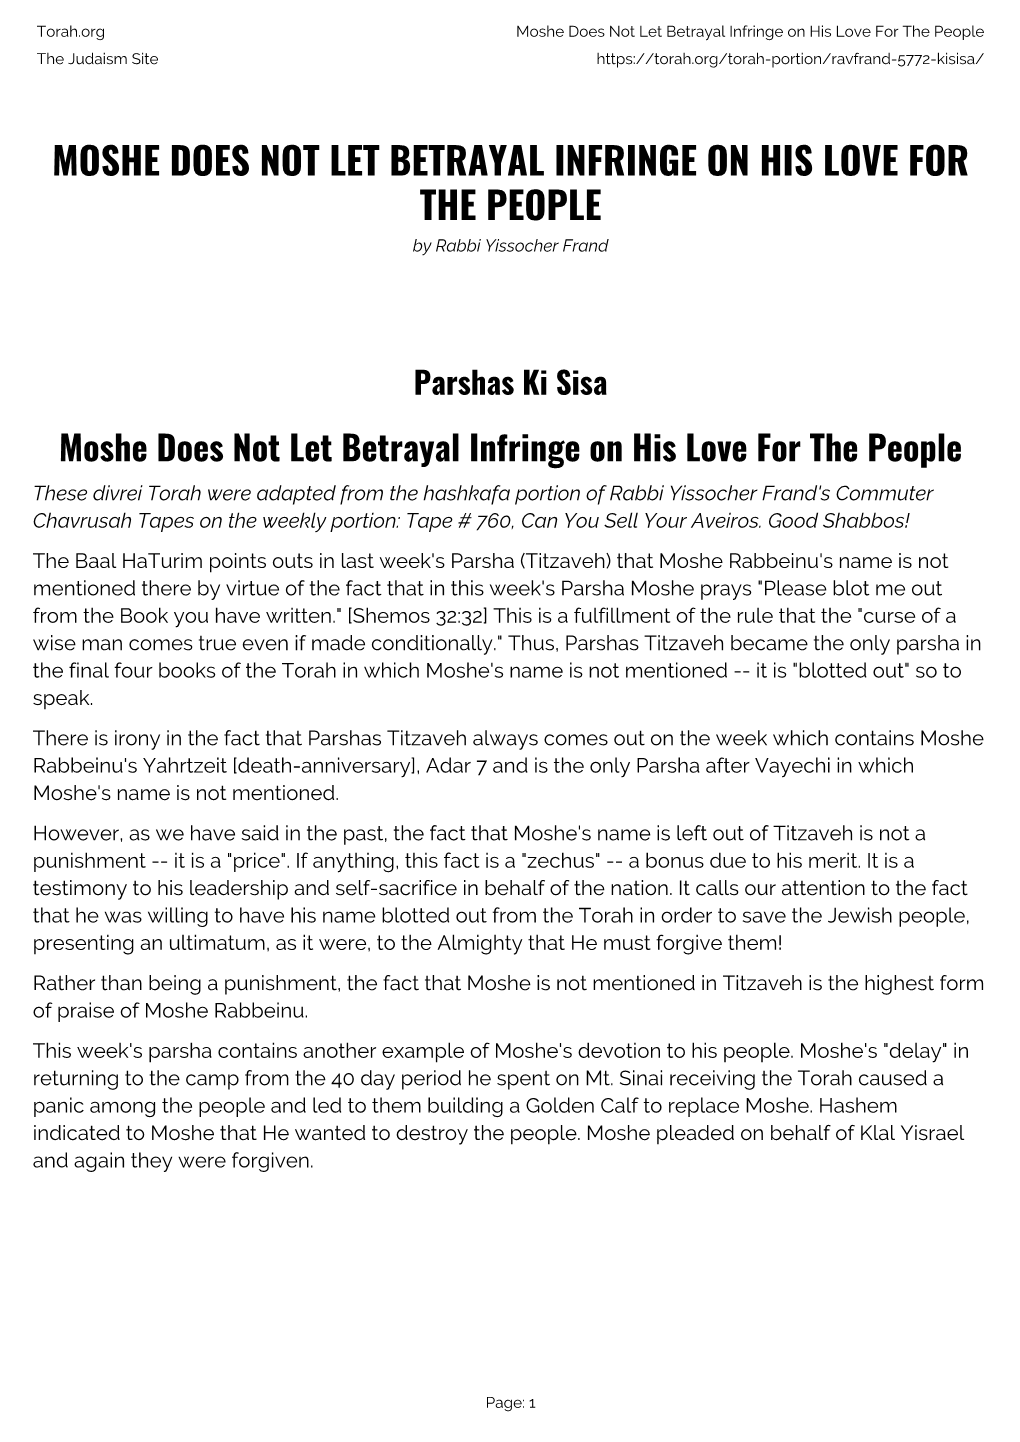 Moshe Does Not Let Betrayal Infringe on His Love for the People the Judaism Site